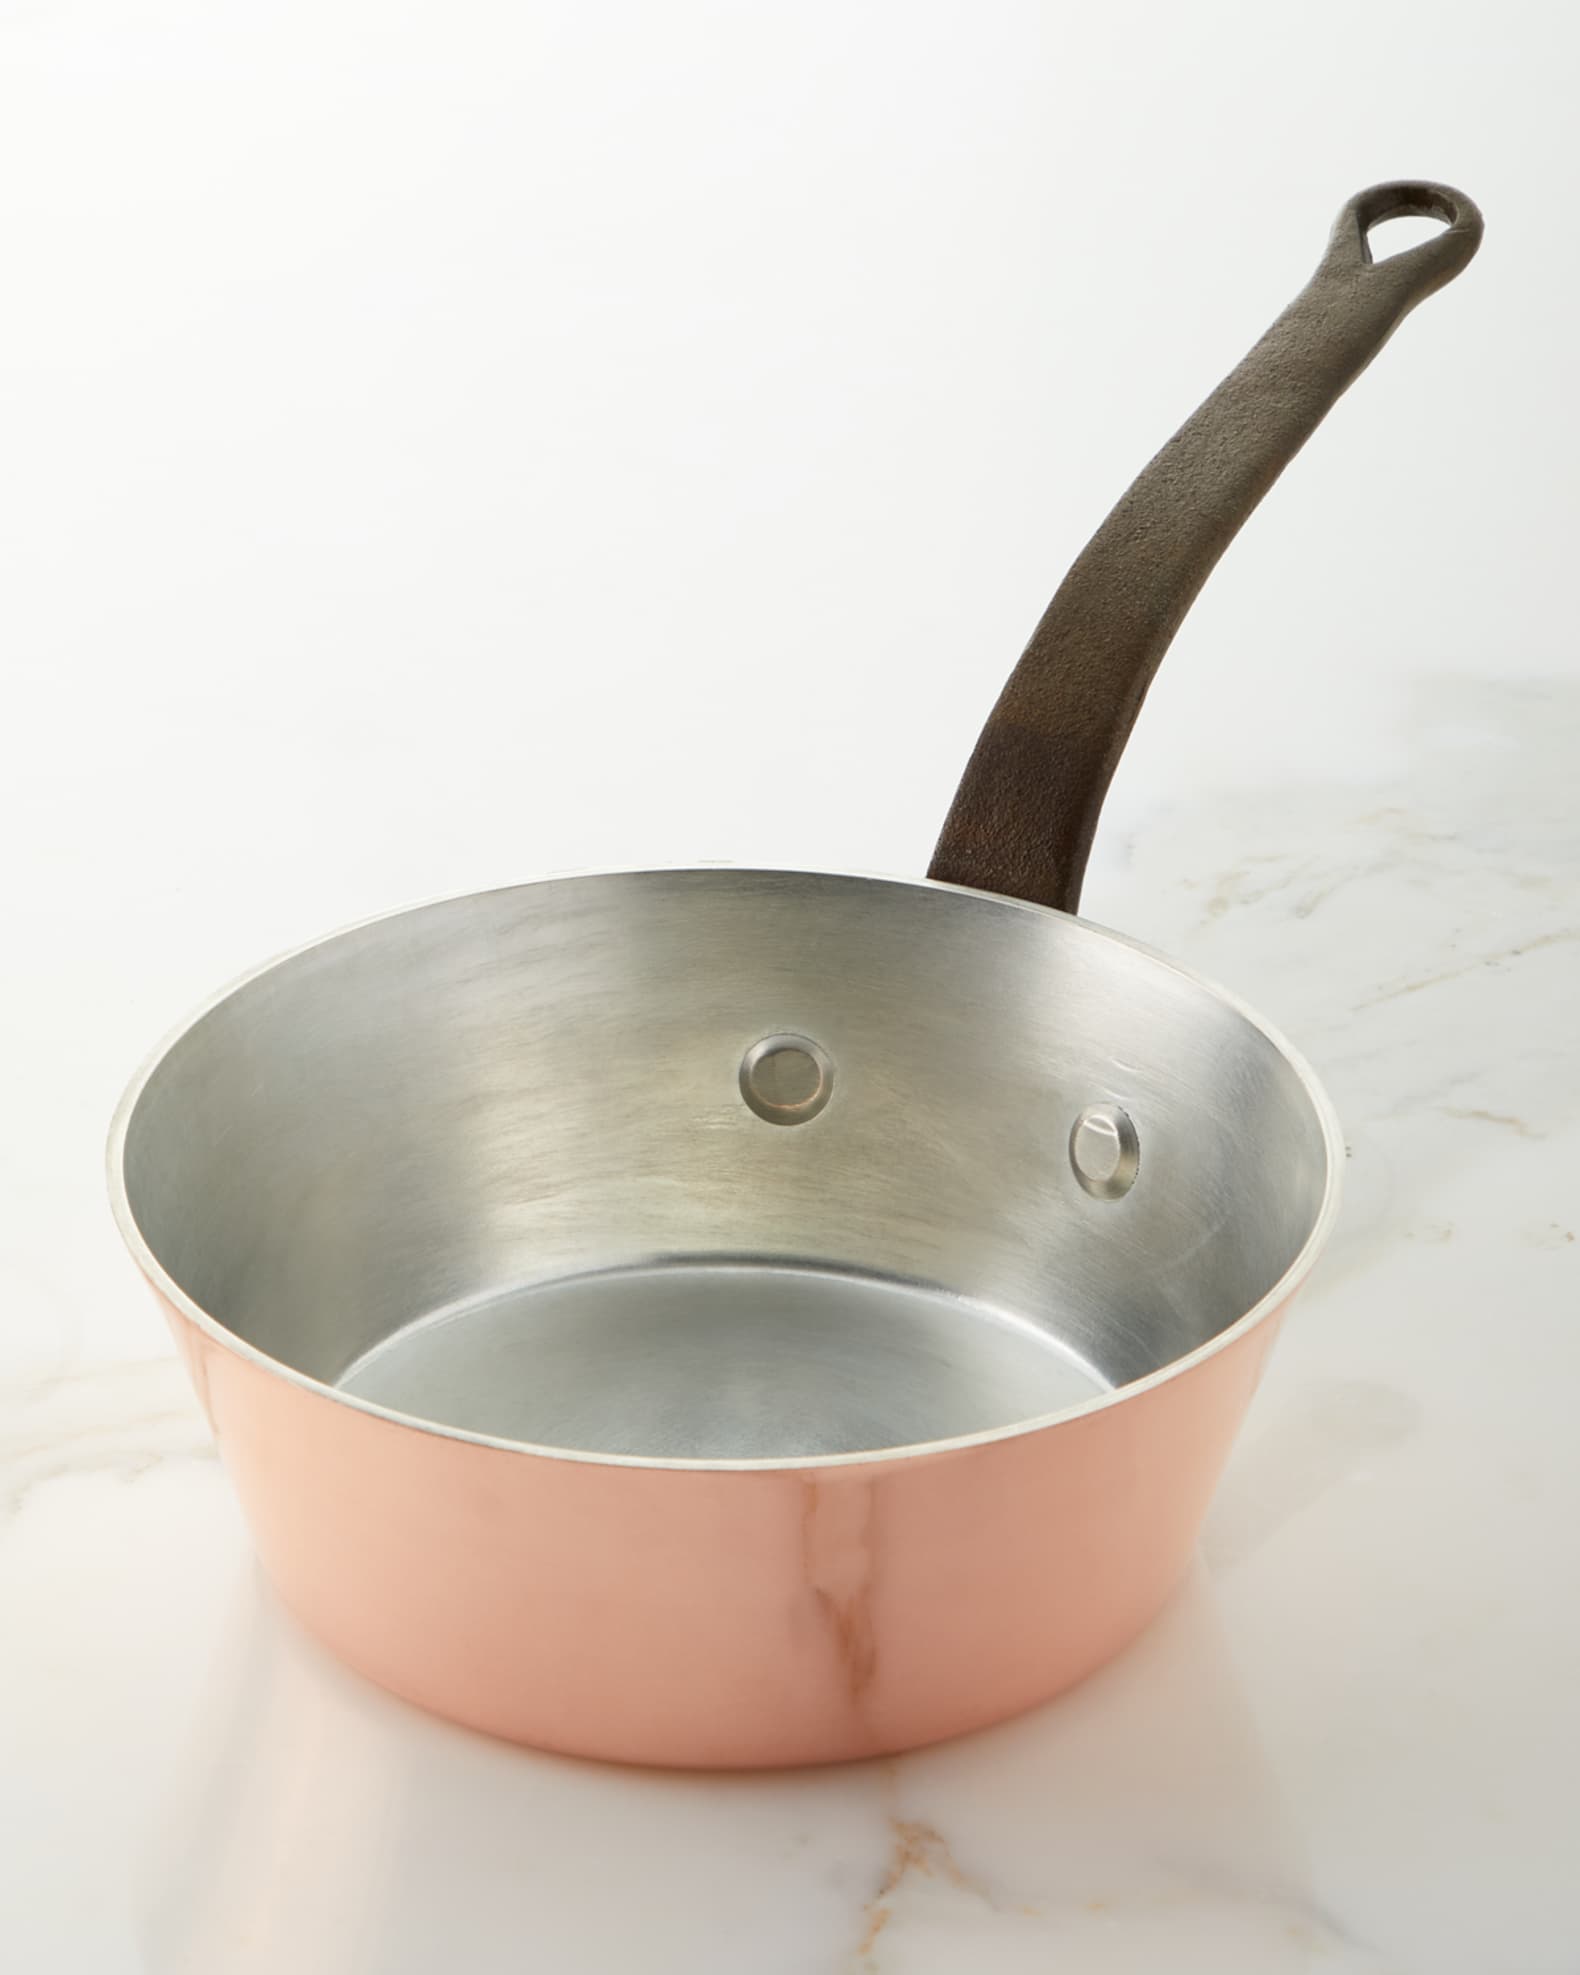 Duparquet Copper Cookware Solid Copper Silver-Lined Pans, Set of 5